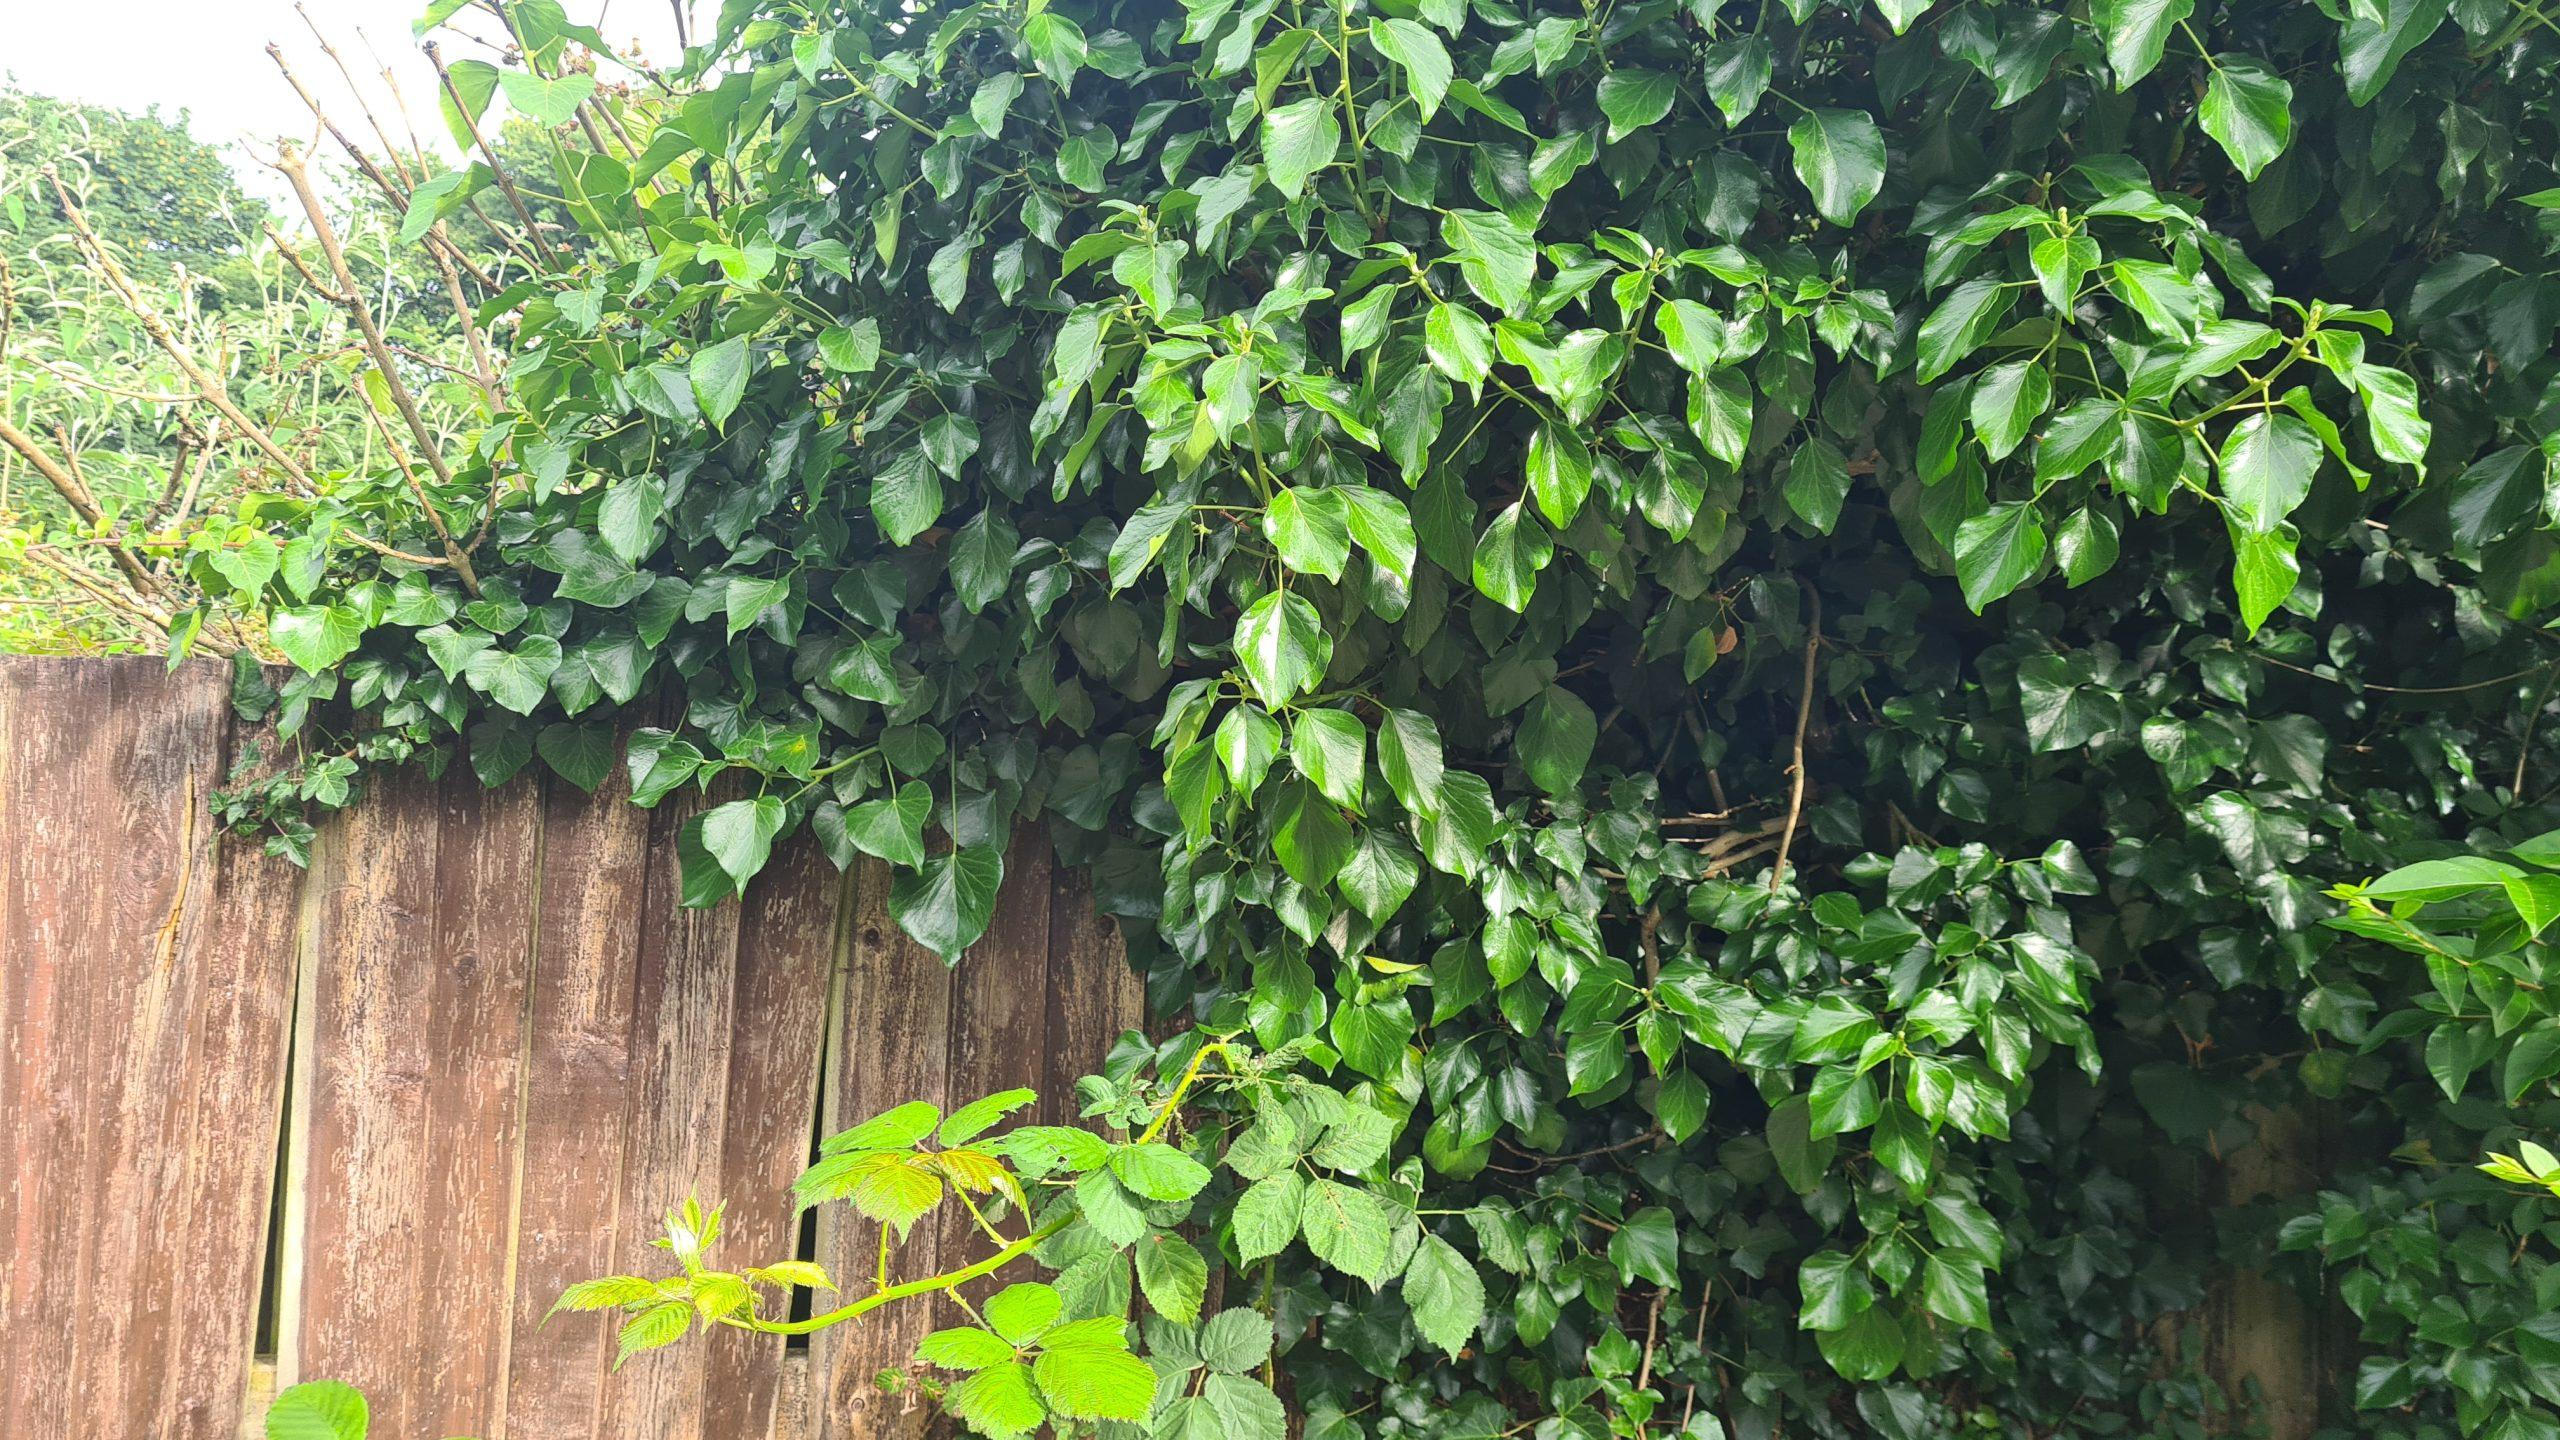 English ivy consuming a boundary and invading into a neighbours garden